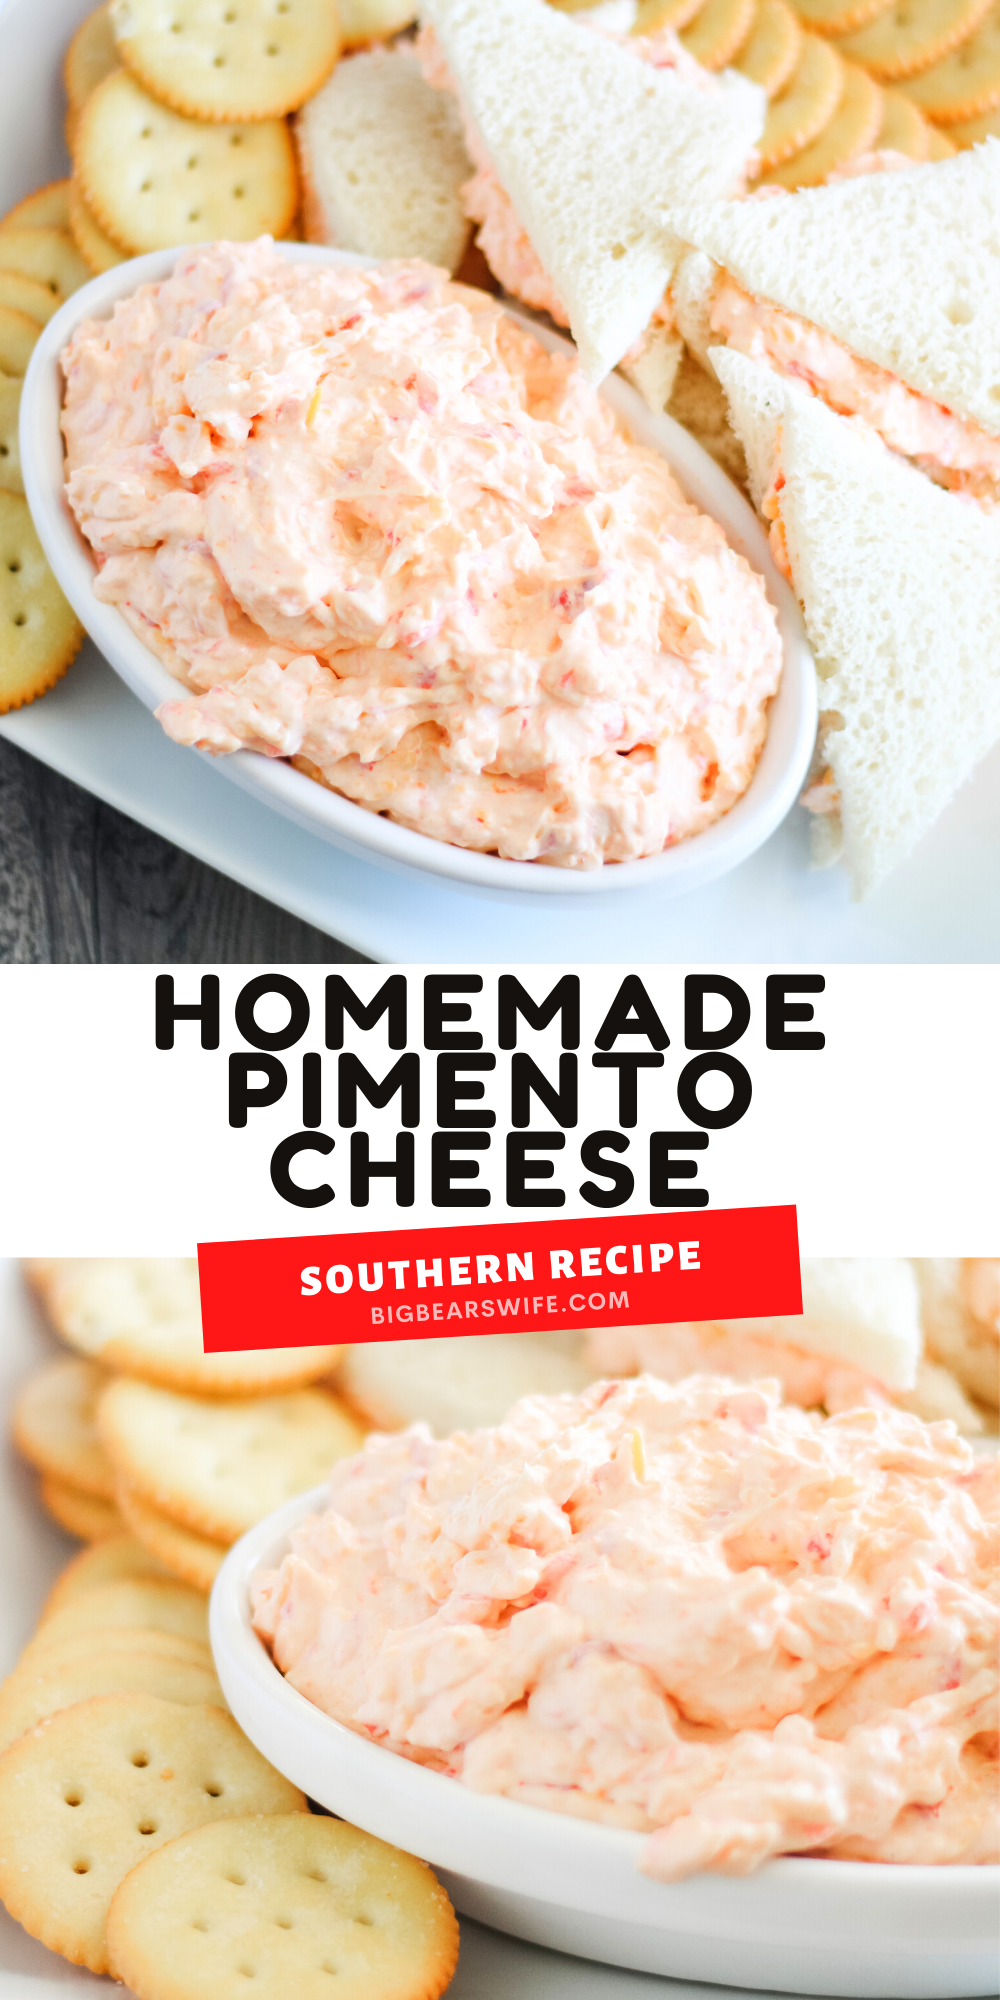 Homemade Southern Pimento Cheese is super easy to make at home! This recipe is a combination of a recipe from my grandmother's recipe box and my own twist. It's our favorite pimento cheese recipe!  via @bigbearswife